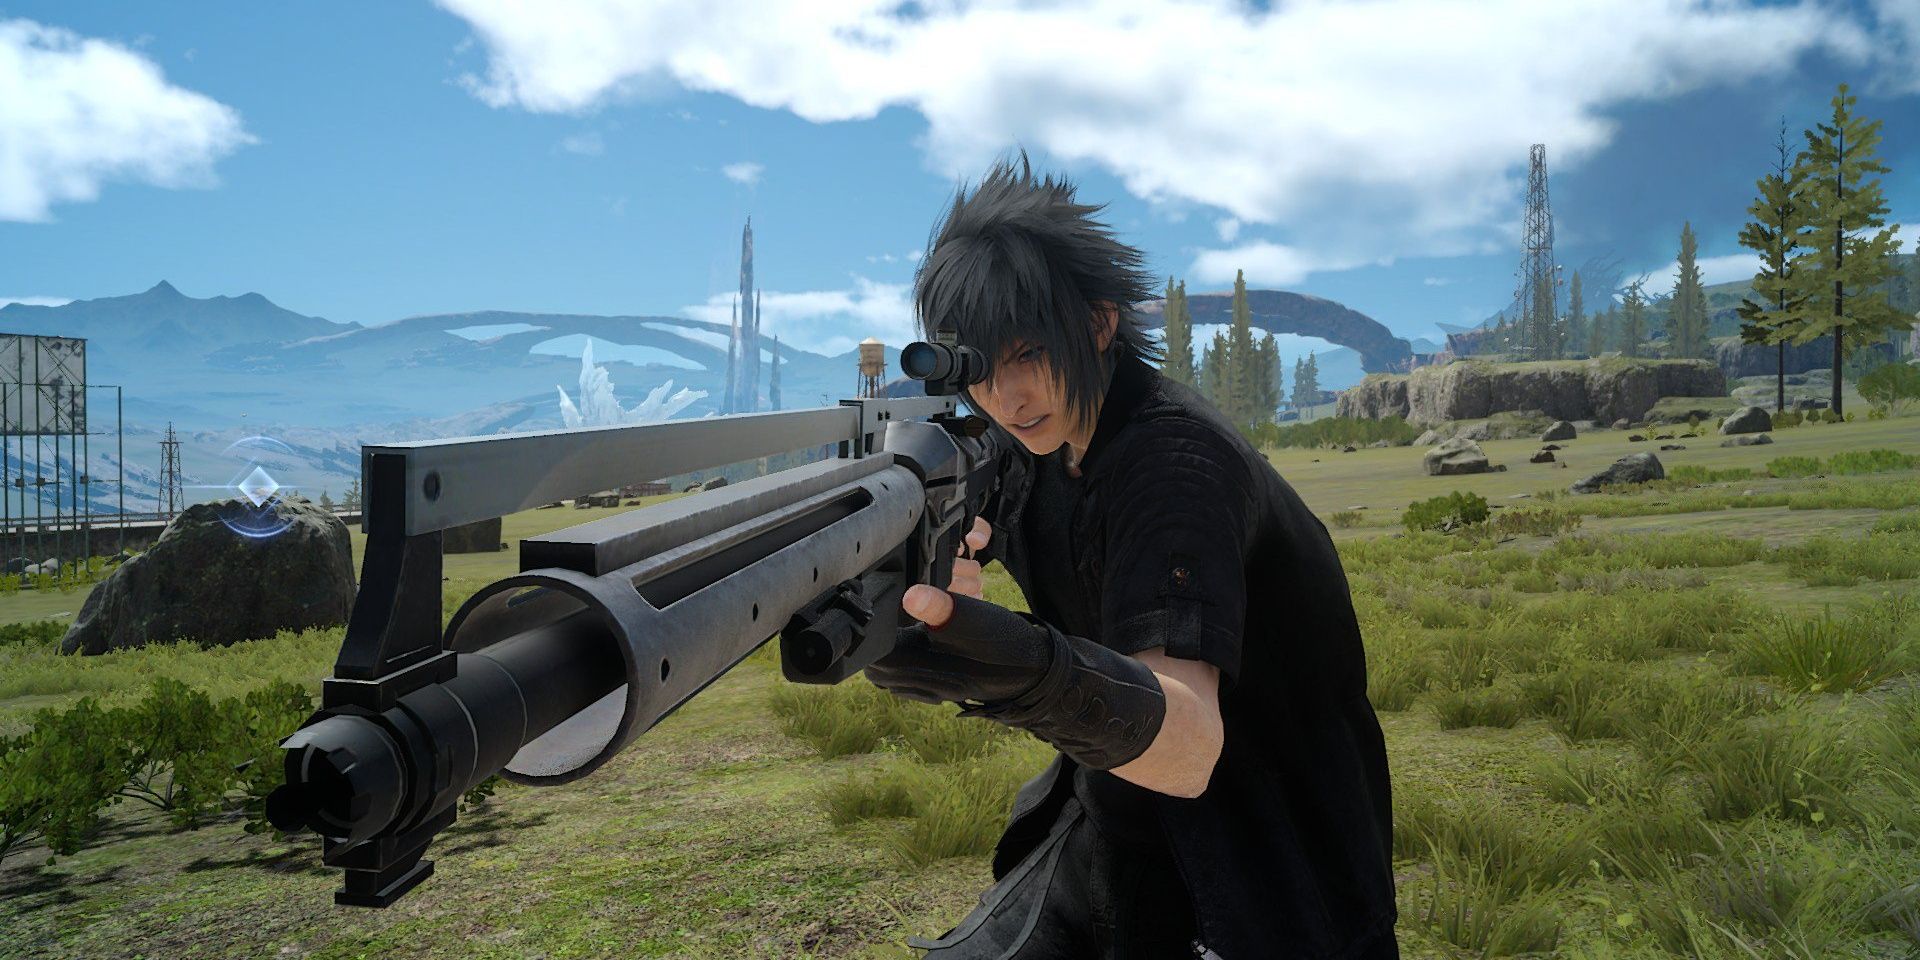 Noctis pointing the cerberus sniper rifle to the bottom left while aiming down the sight